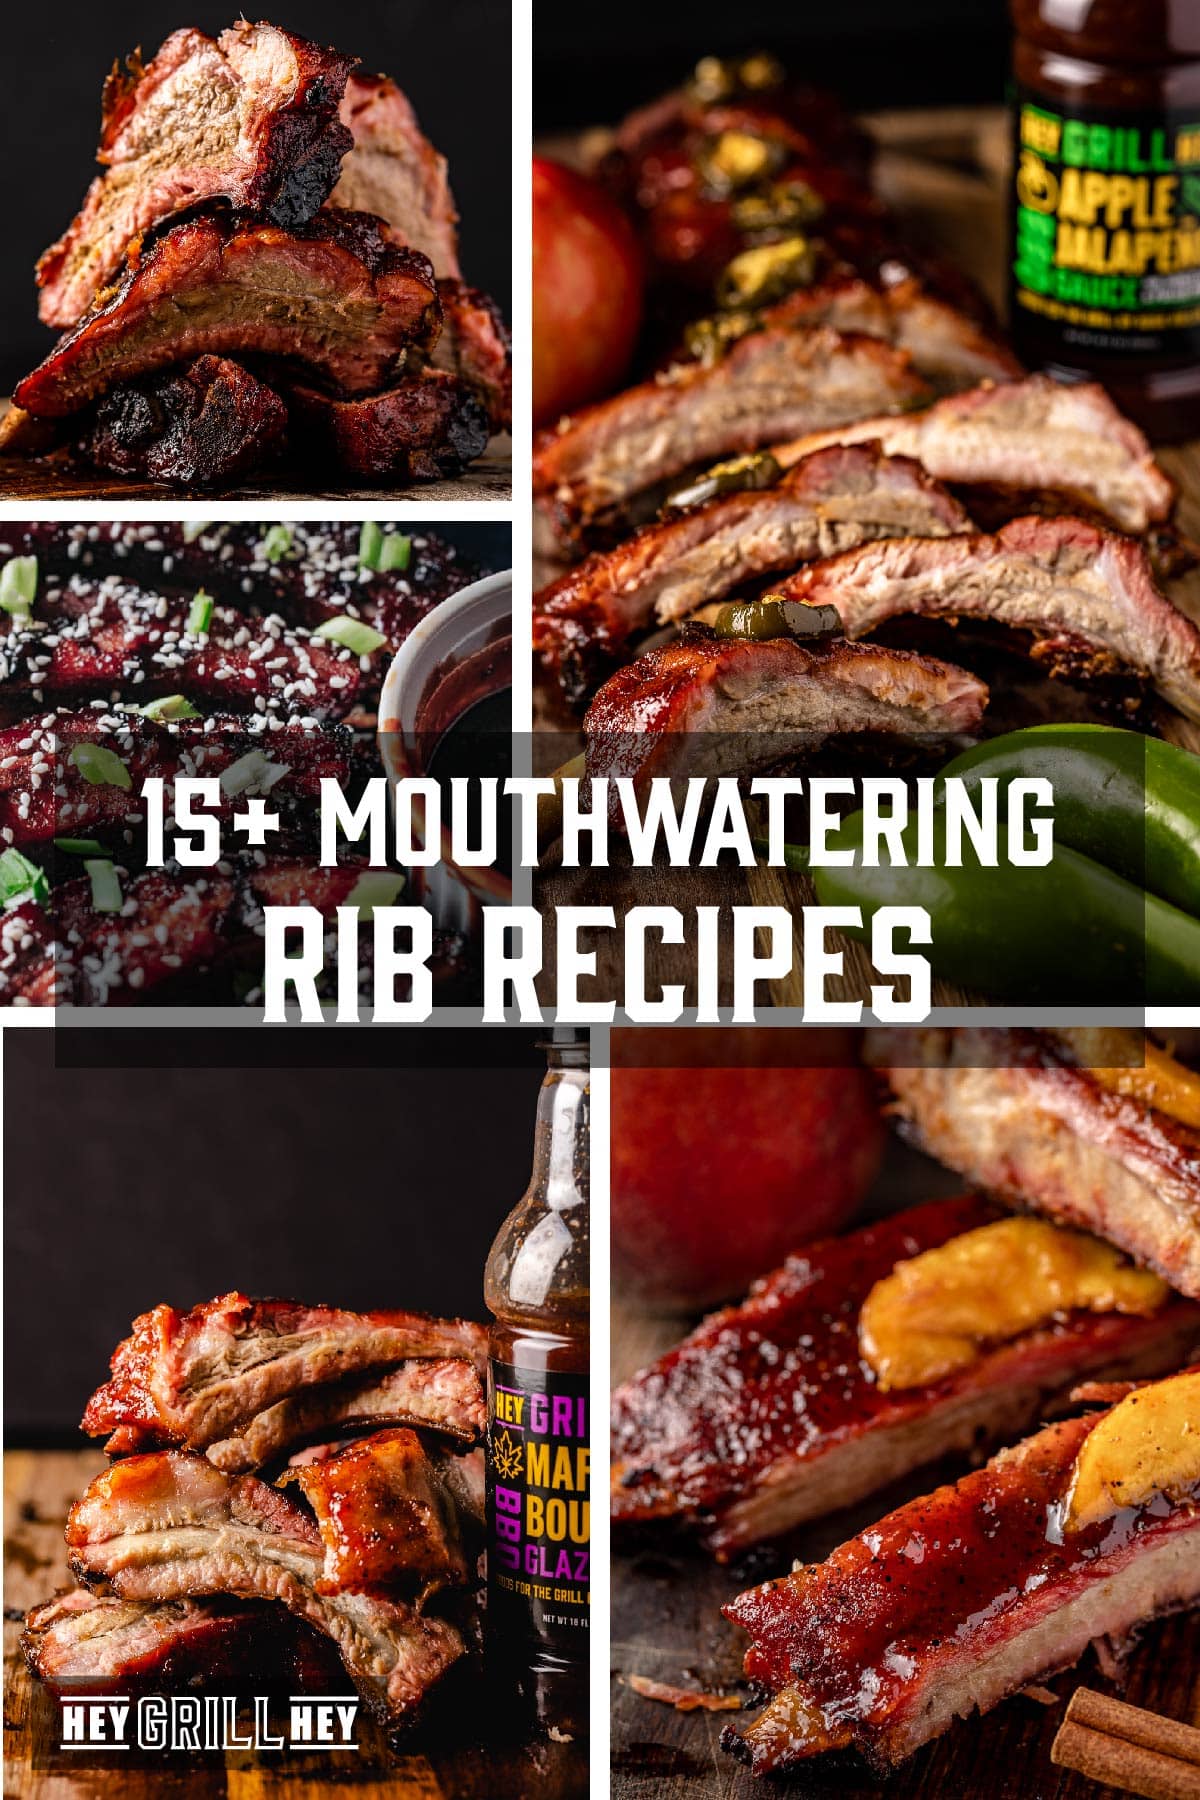 Various pictures or ribs in frames. Text reads "25+ Mouthwatering Rib Recipes".